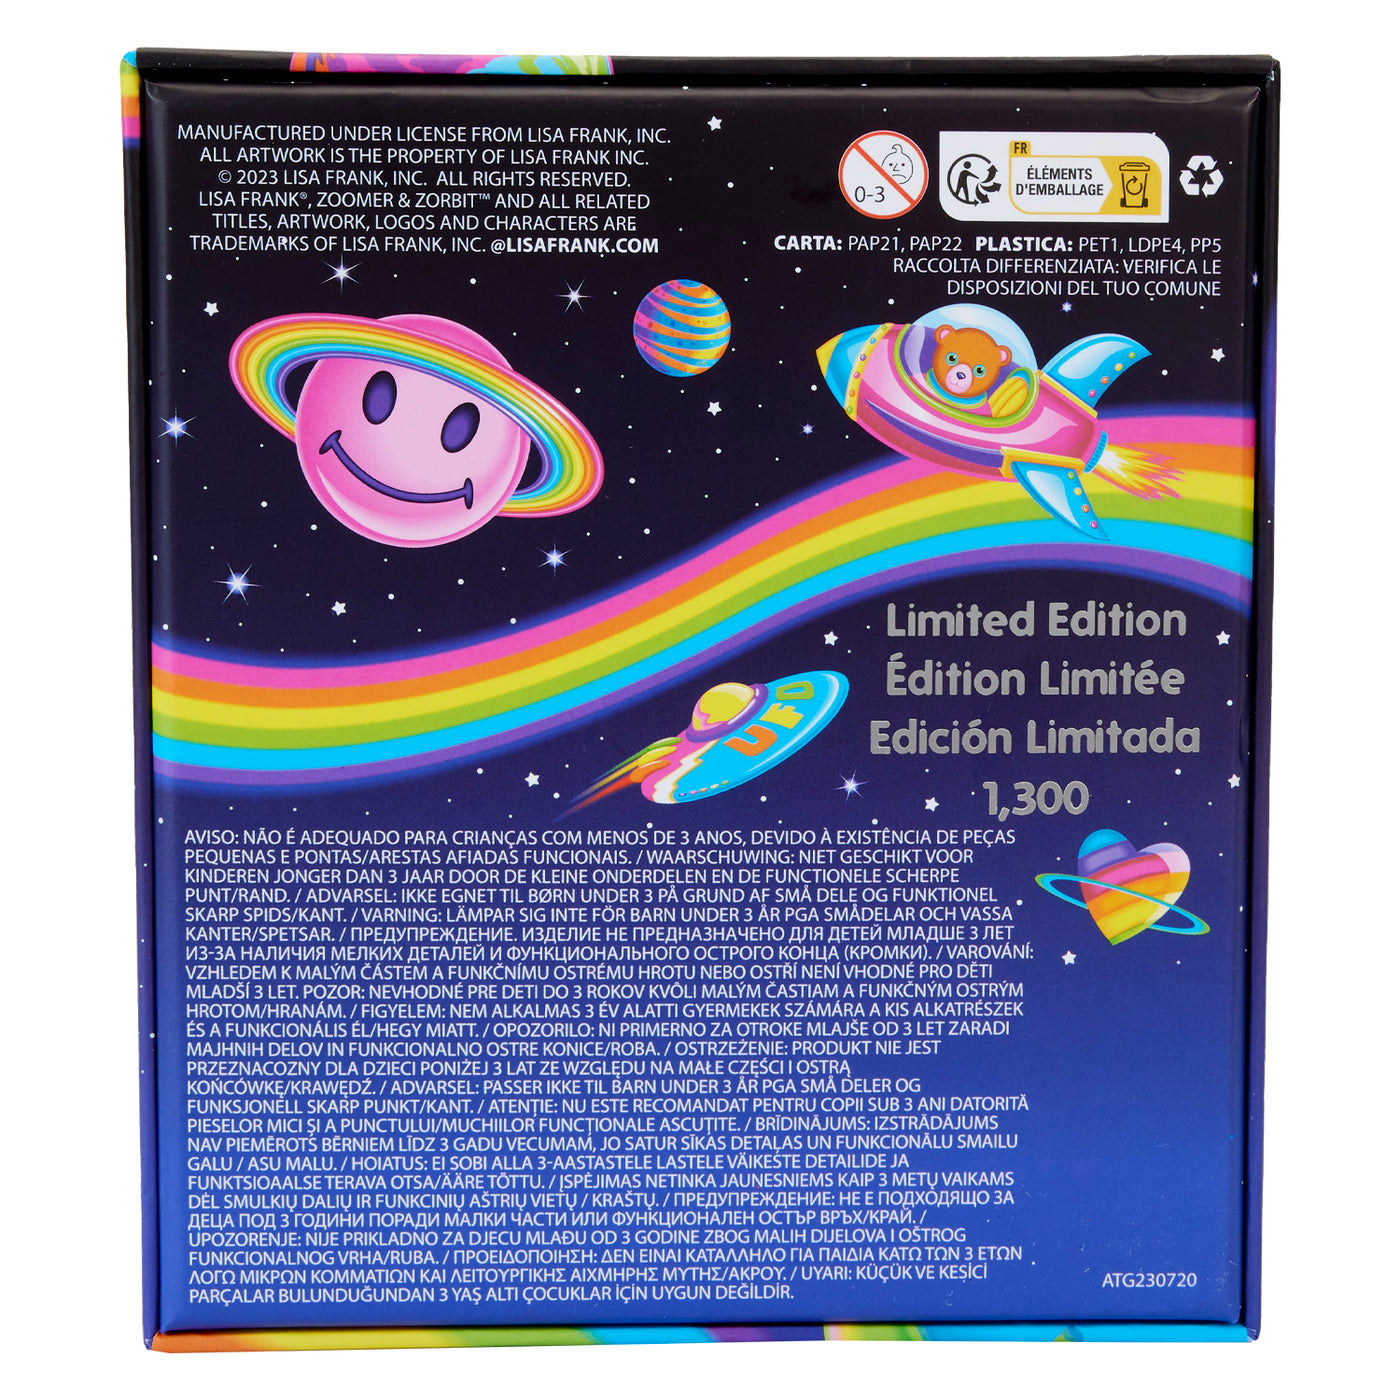 Lisa Frank Zoomer & Zorbit 3" Collector Box Limited Edition Pin